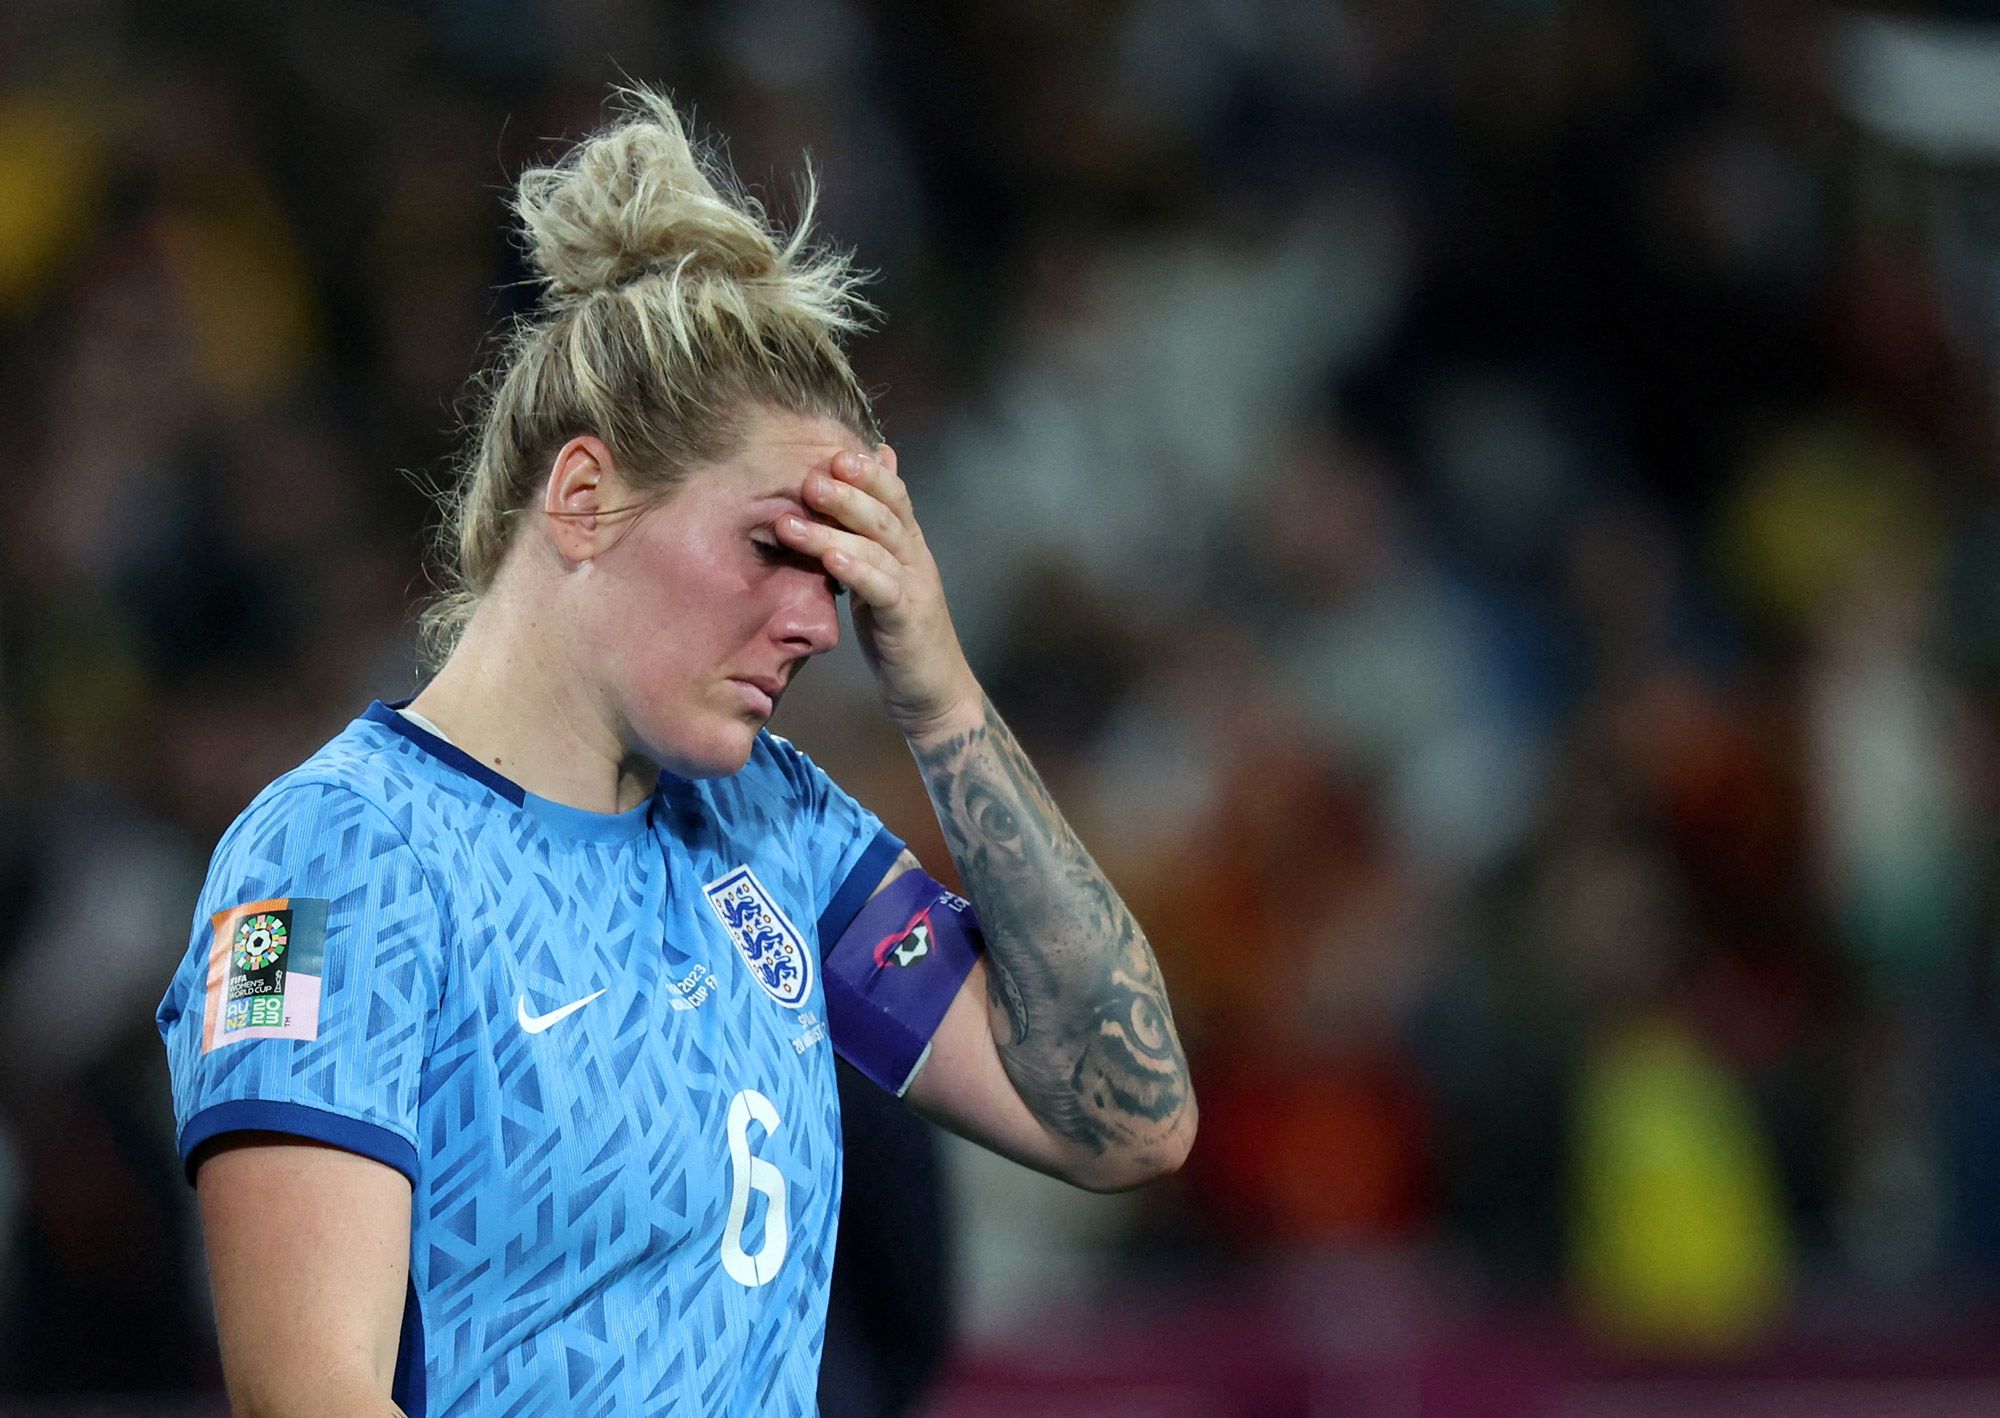 The future is uncertain for the U.S. after crashing out of the Women's  World Cup : NPR